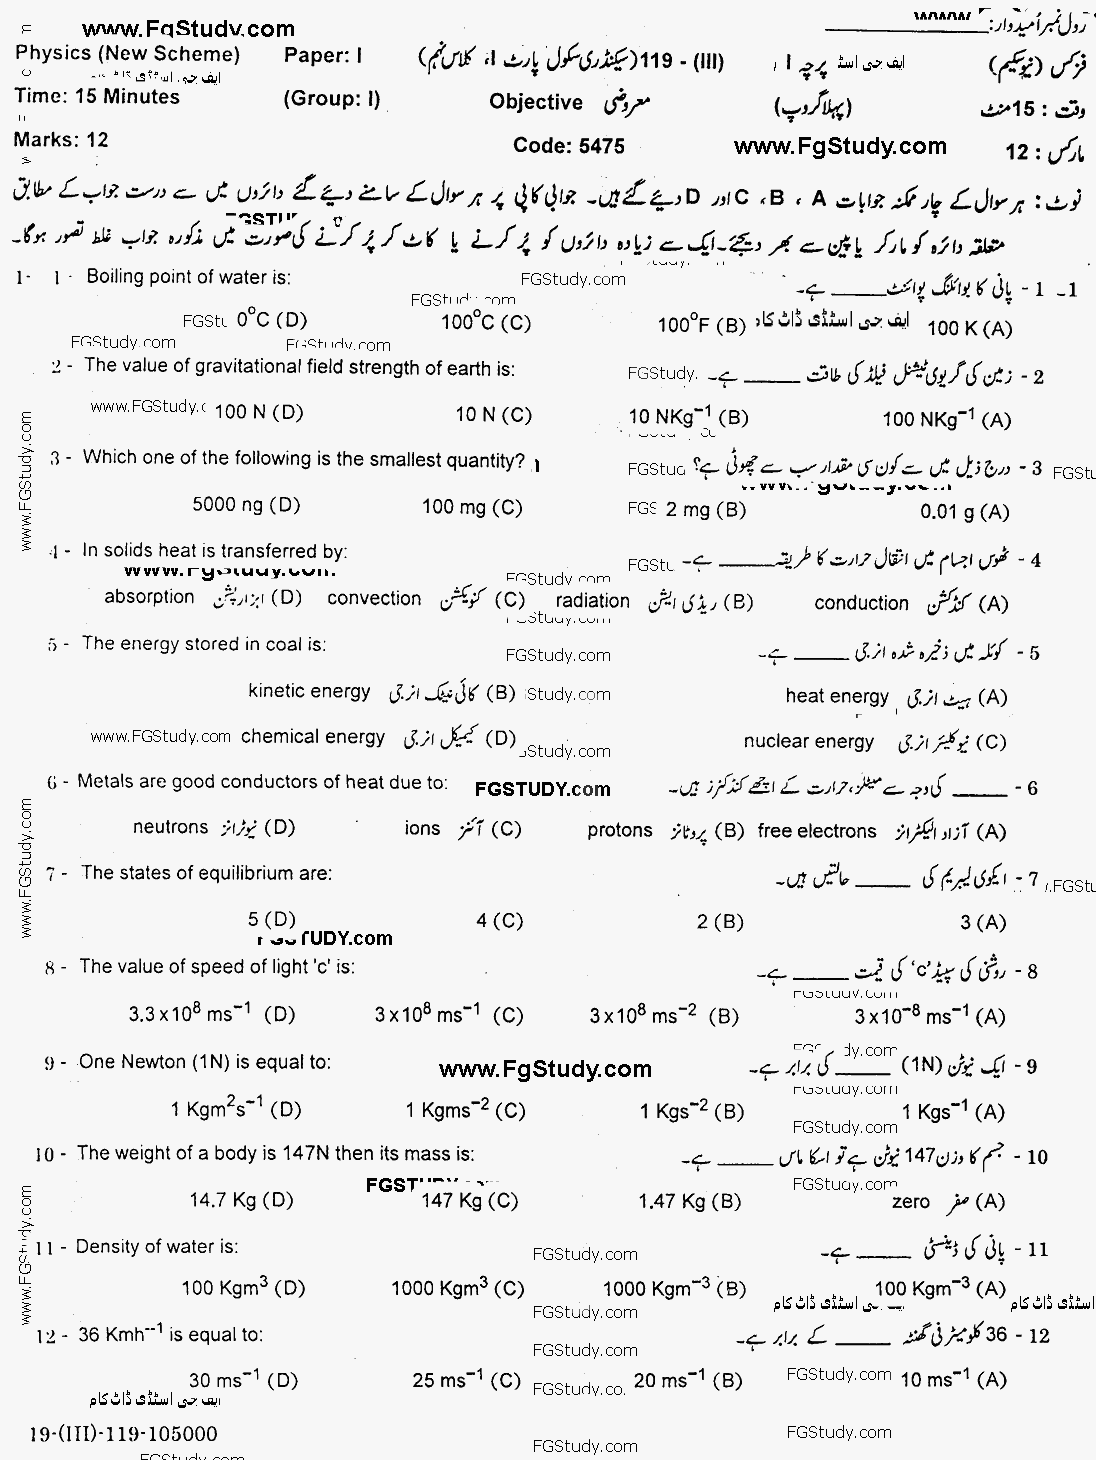 Gujranwala Board Physics Objective Group 1 9th Class Past Papers 2019